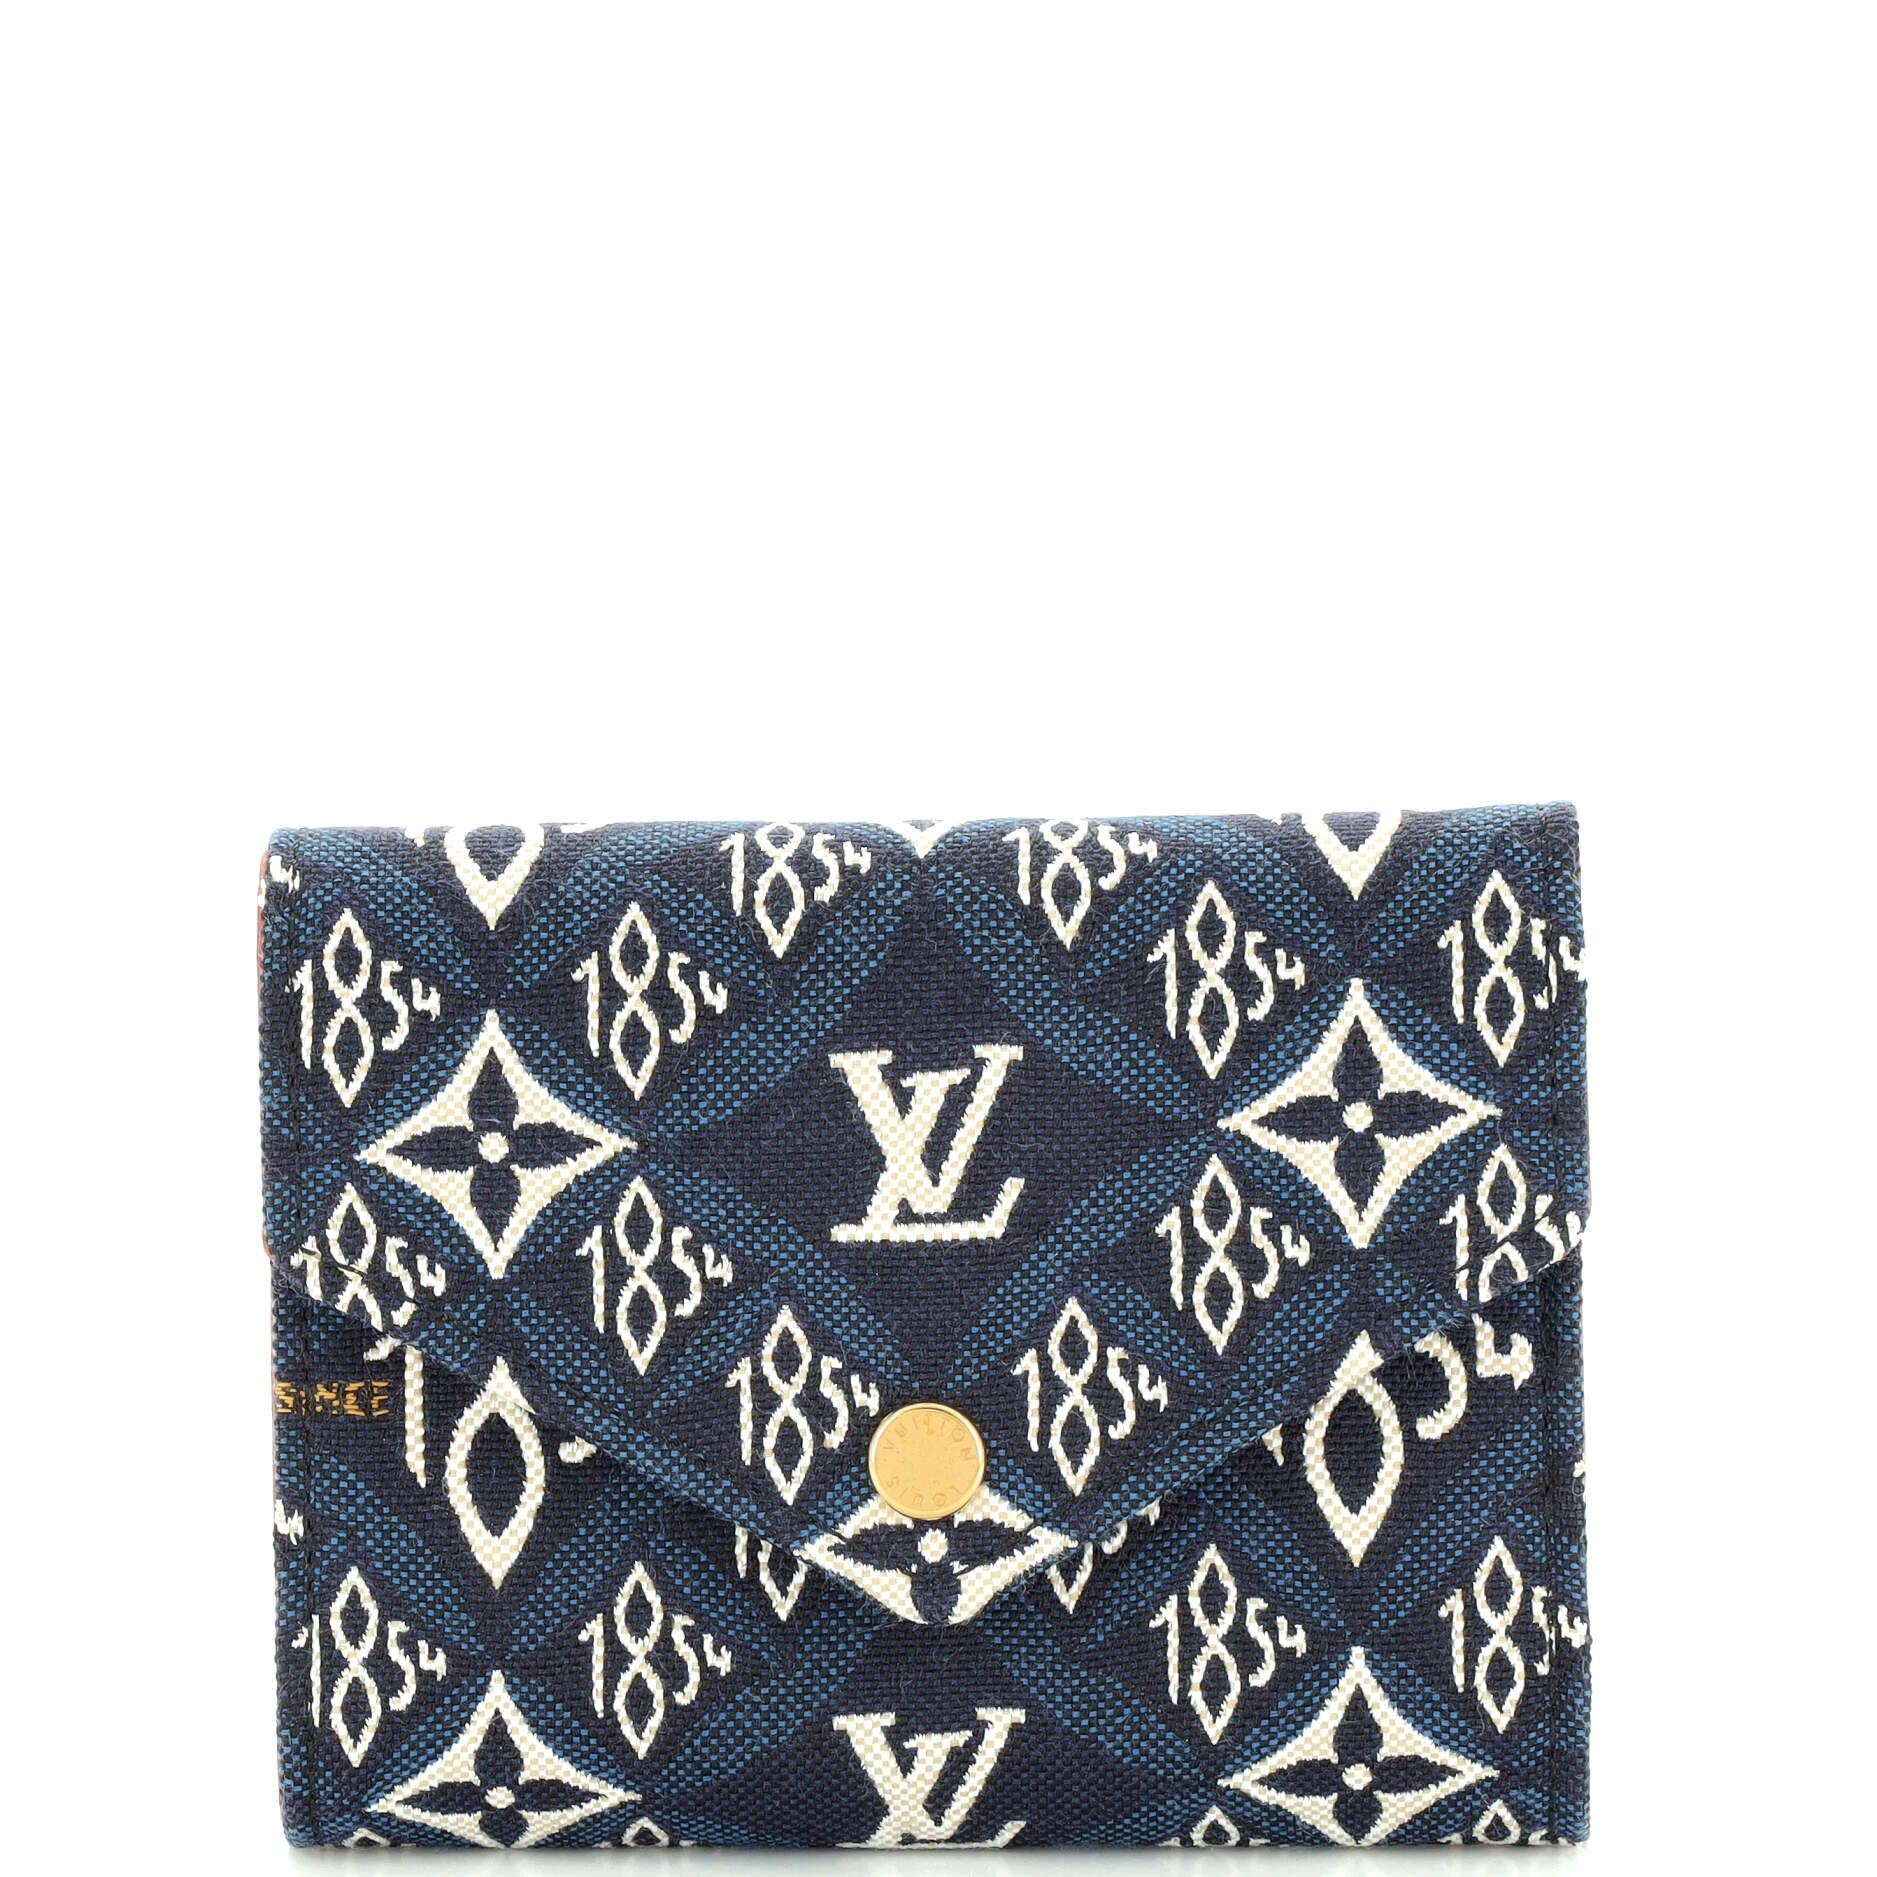 Dauphine Chain Wallet Limited Edition Since 1854 Monogram Jacquard